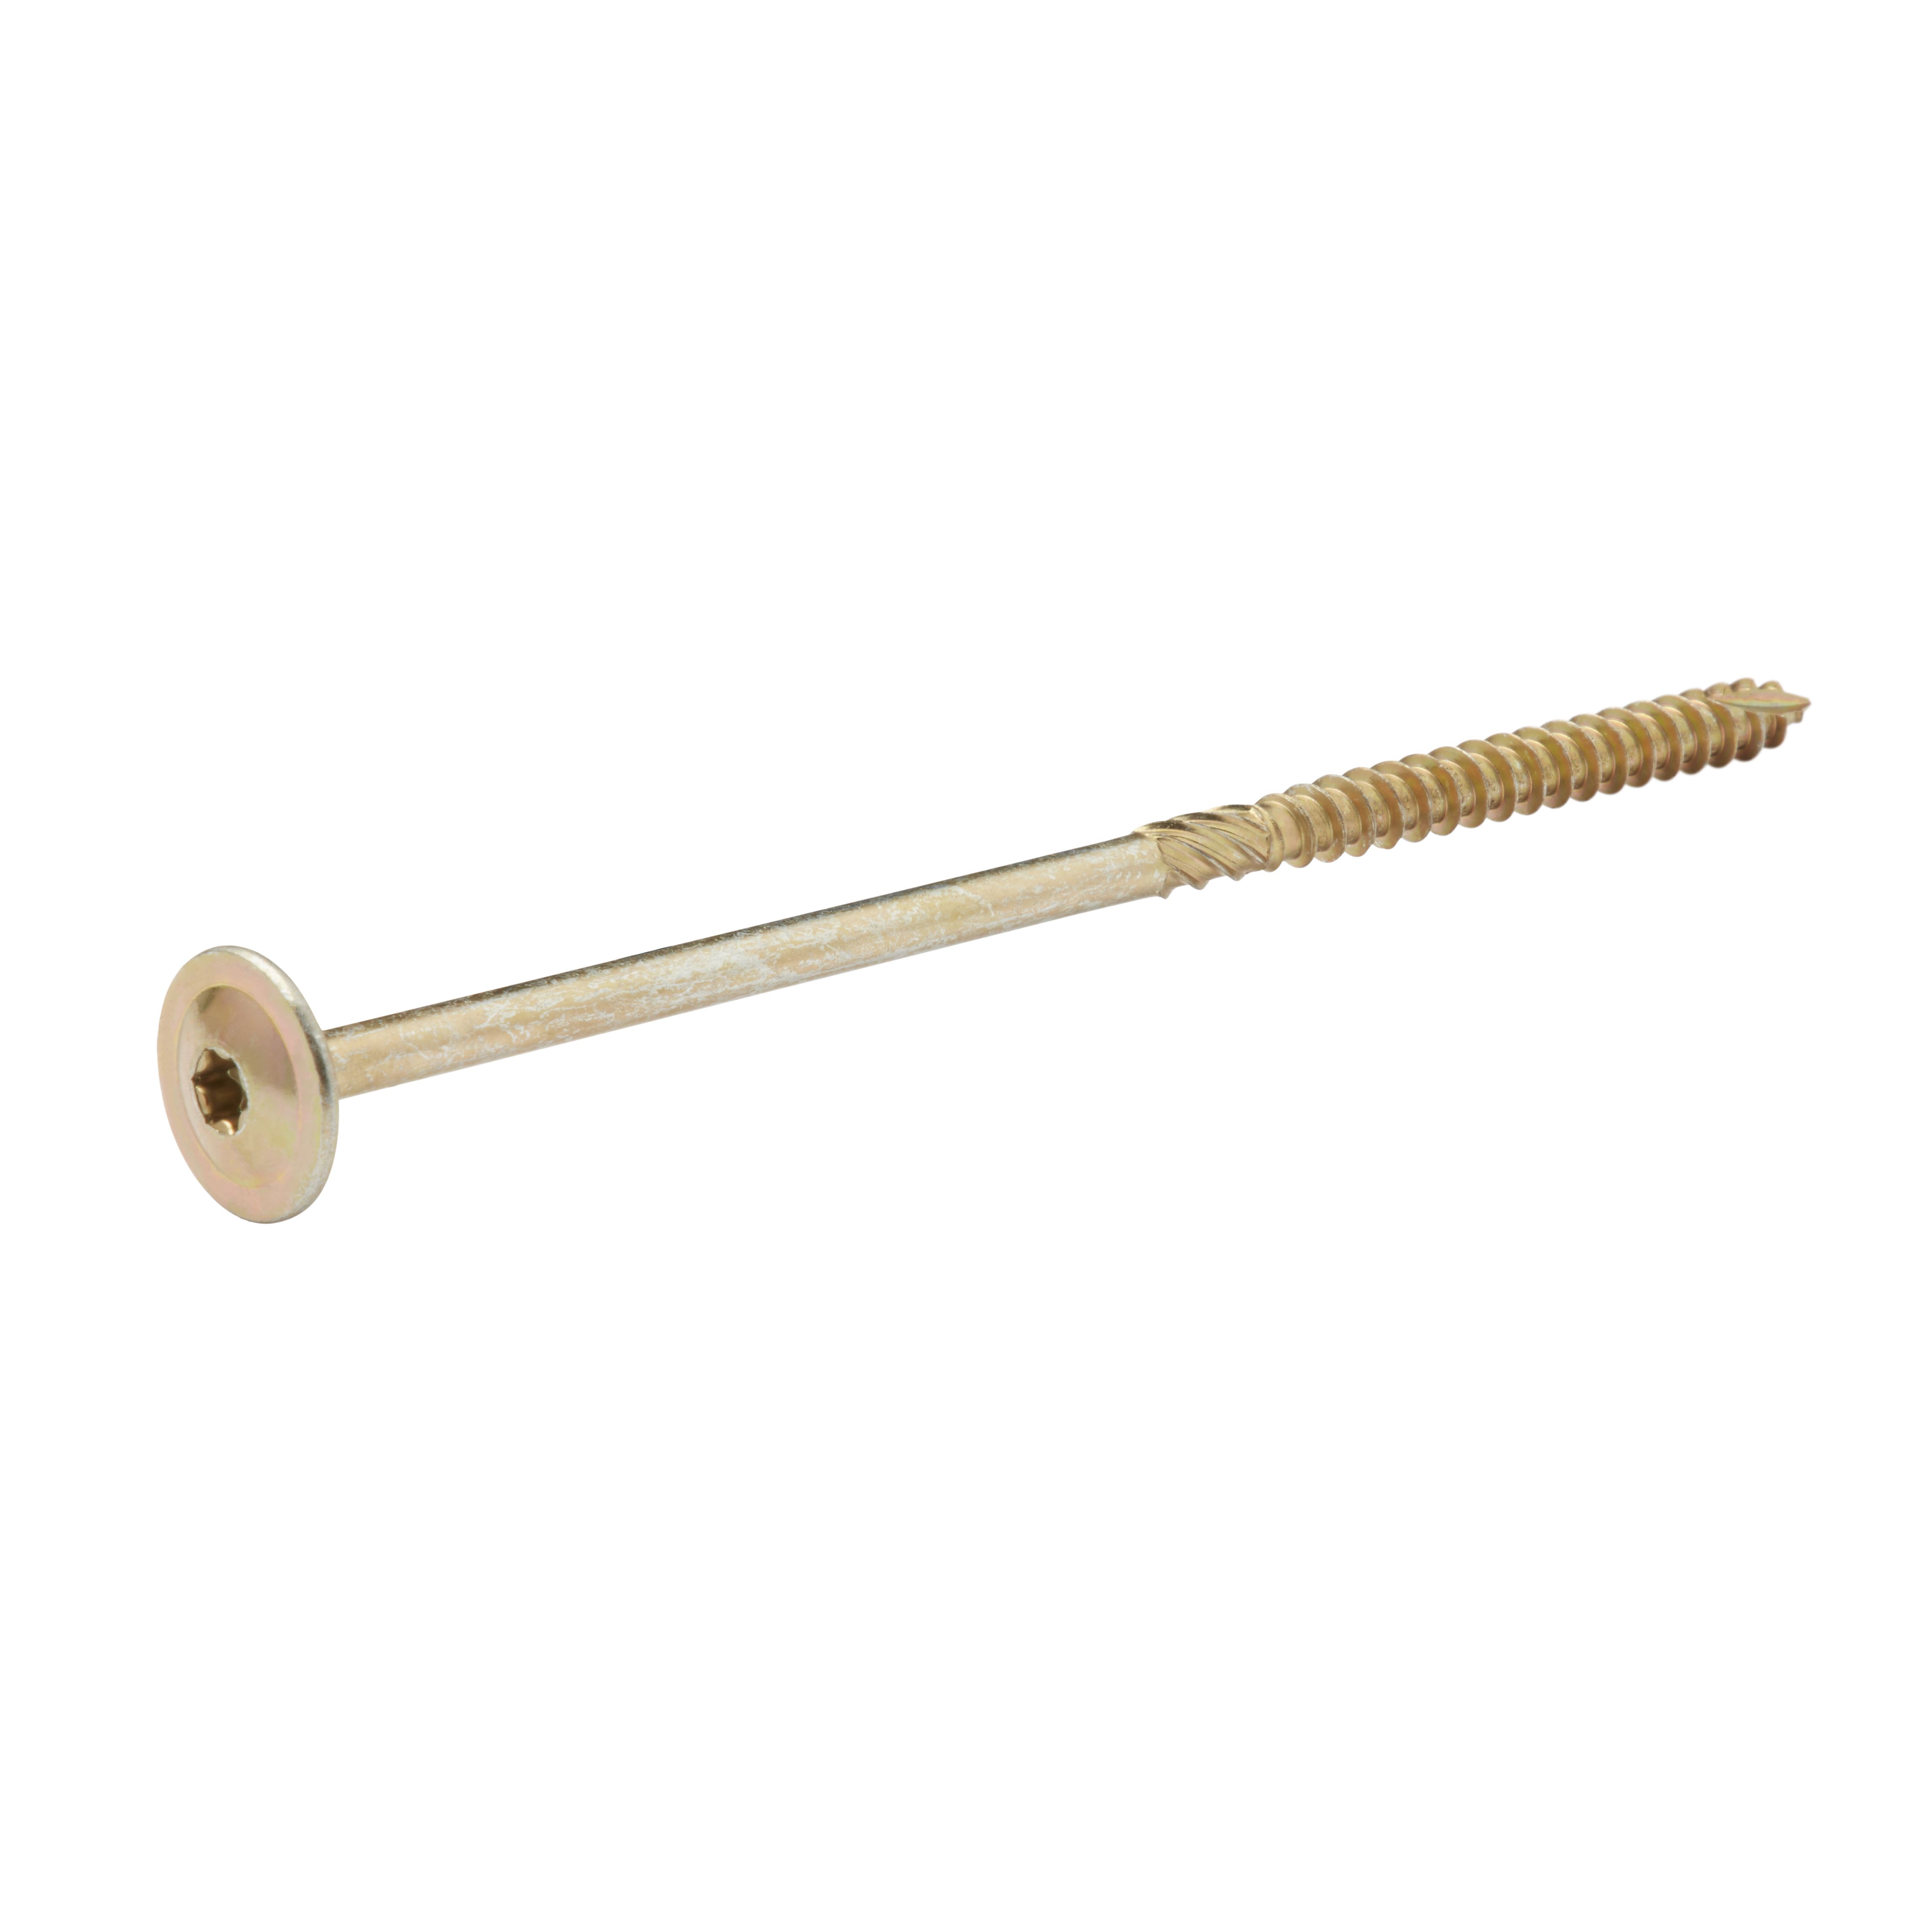 Diall Torx Wafer Yellow-passivated Carbon steel Screw (Dia)8mm (L)180mm